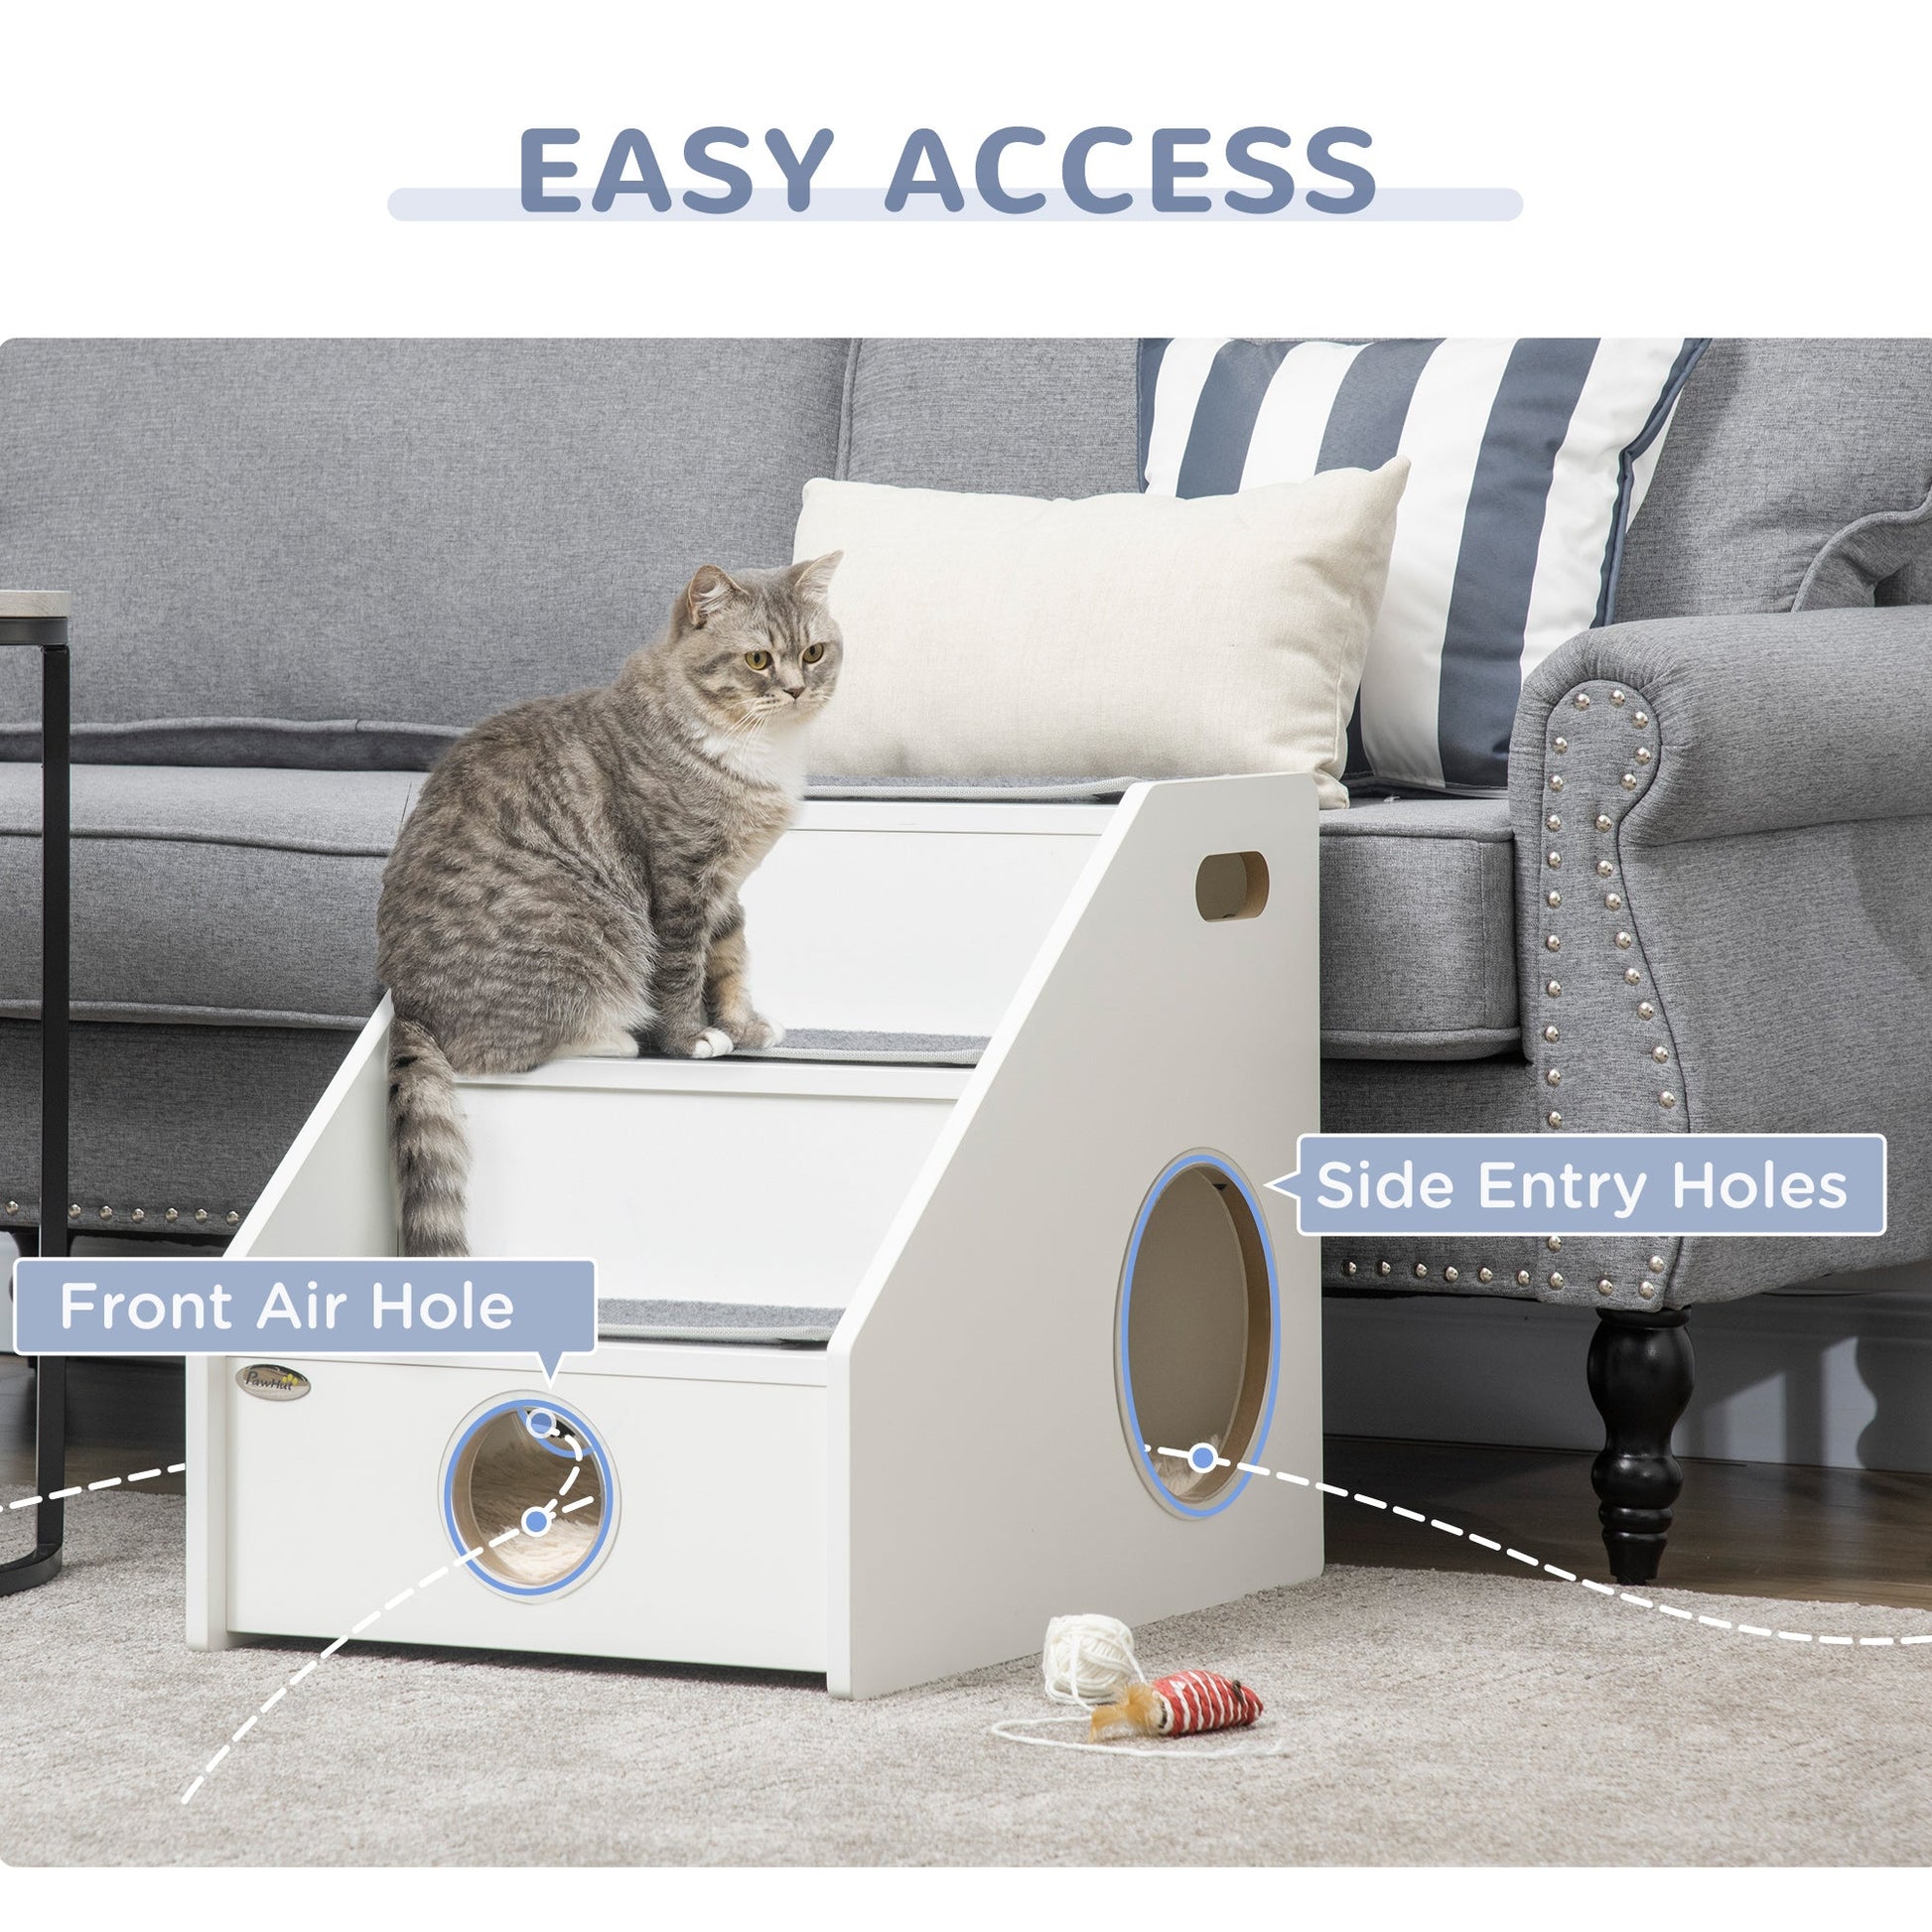 Pet Stairs for Miniature Dogs Hidden House, Cat Steps for Couch High Bed Sofa, Portable Puppy Stairs for Climbing with Handles, Non-Slip Carpet, Side Holes for Entry, White at Gallery Canada